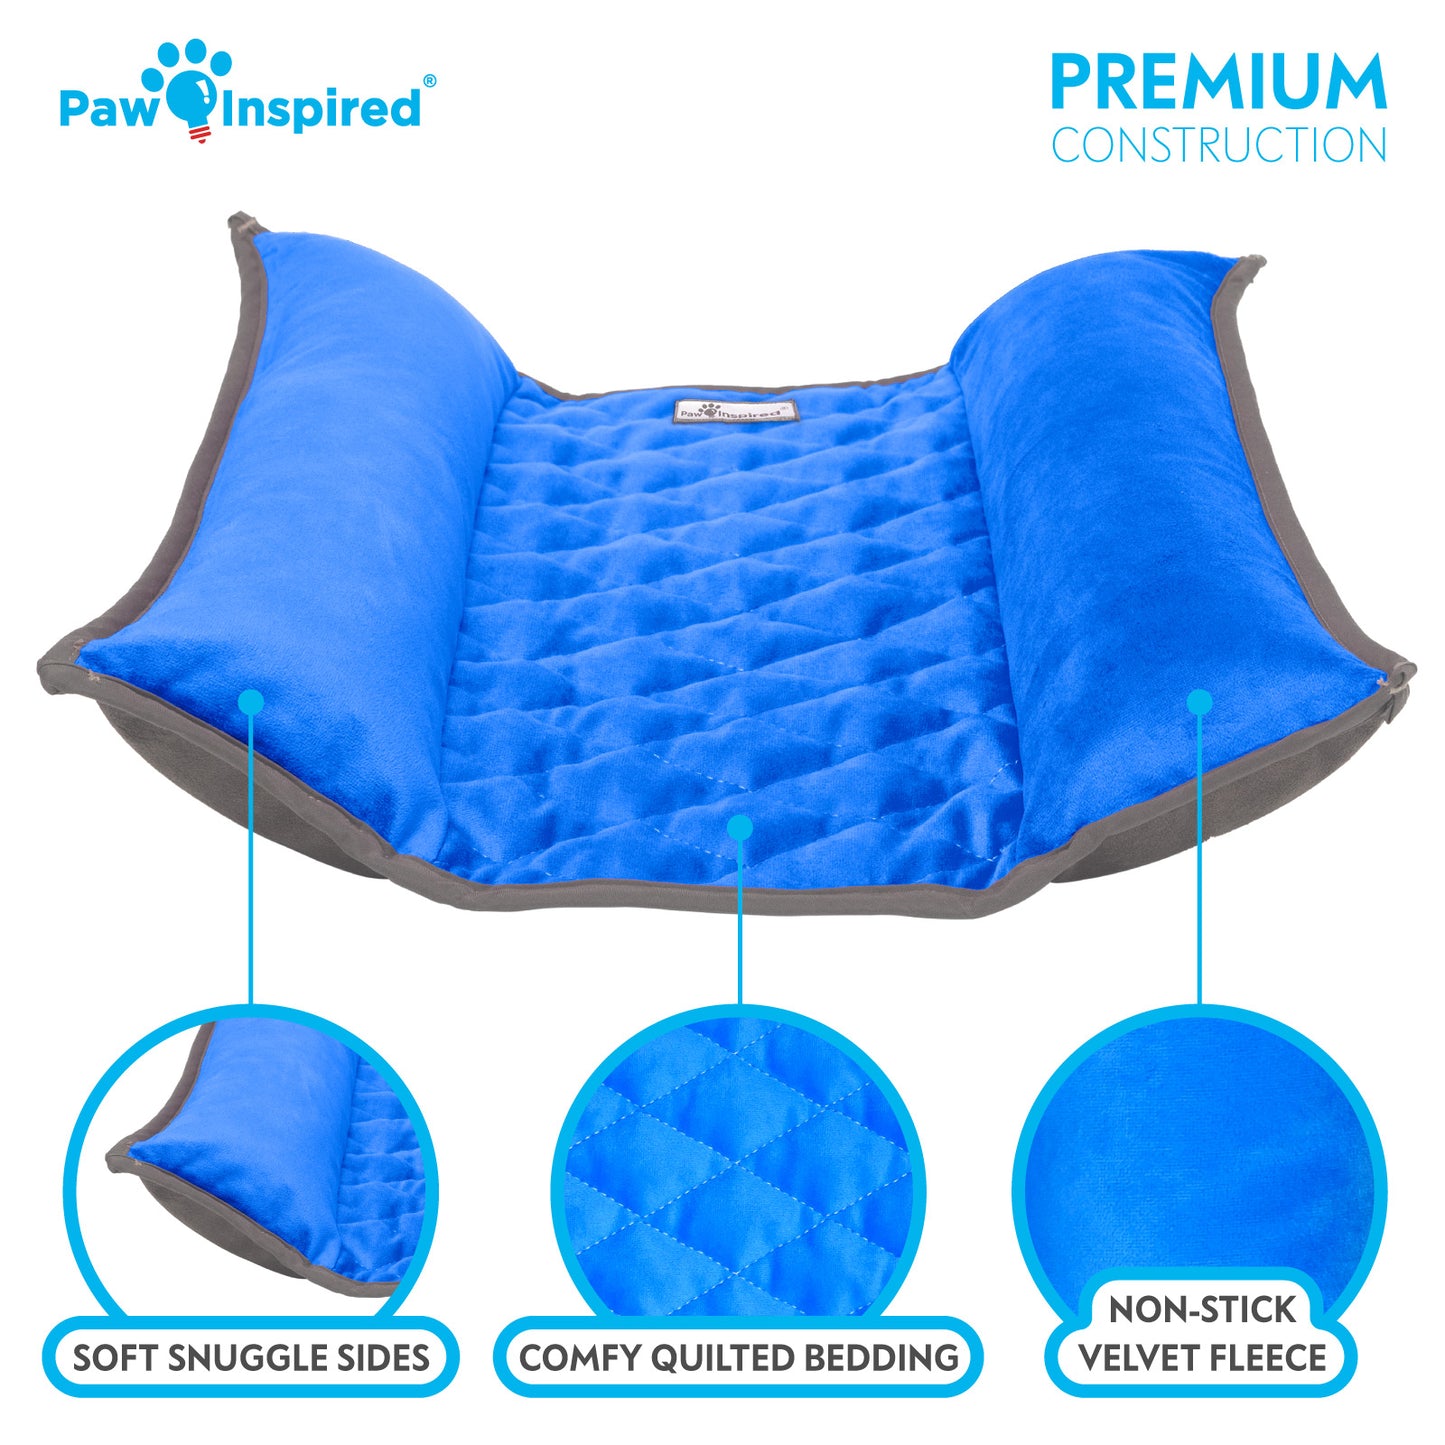 Snuggle Bunny™ Pet Bed with Padded Sides for Rabbits and Other Small Animals